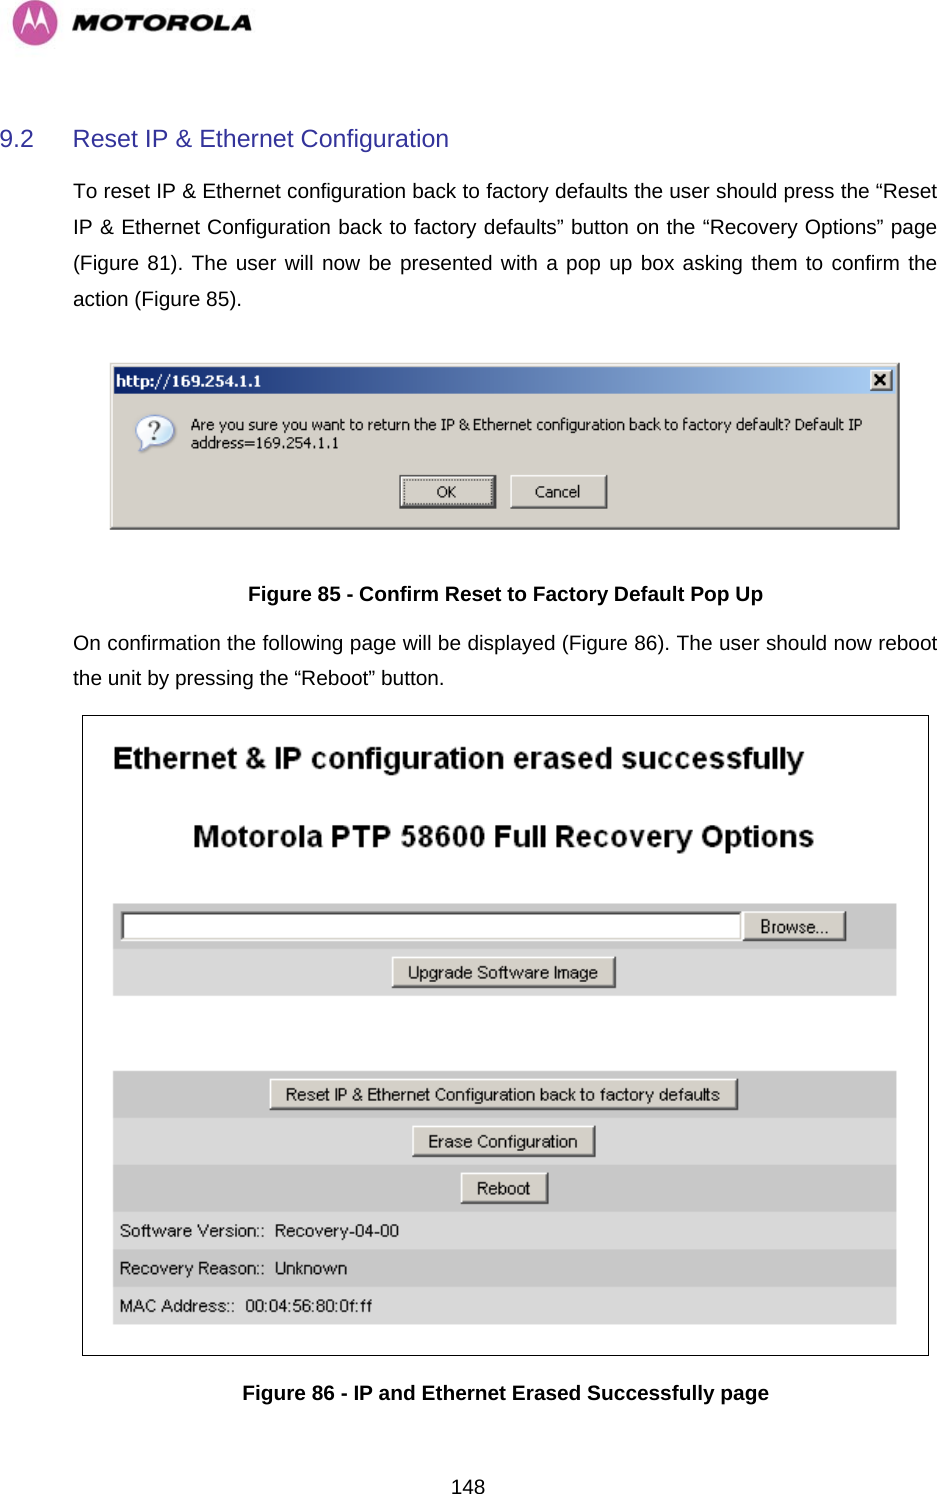   1489.2  Reset IP &amp; Ethernet Configuration To reset IP &amp; Ethernet configuration back to factory defaults the user should press the “Reset IP &amp; Ethernet Configuration back to factory defaults” button on the “Recovery Options” page (Figure 81). The user will now be presented with a pop up box asking them to confirm the action (Figure 85).  Figure 85 - Confirm Reset to Factory Default Pop Up On confirmation the following page will be displayed (Figure 86). The user should now reboot the unit by pressing the “Reboot” button.  Figure 86 - IP and Ethernet Erased Successfully page 